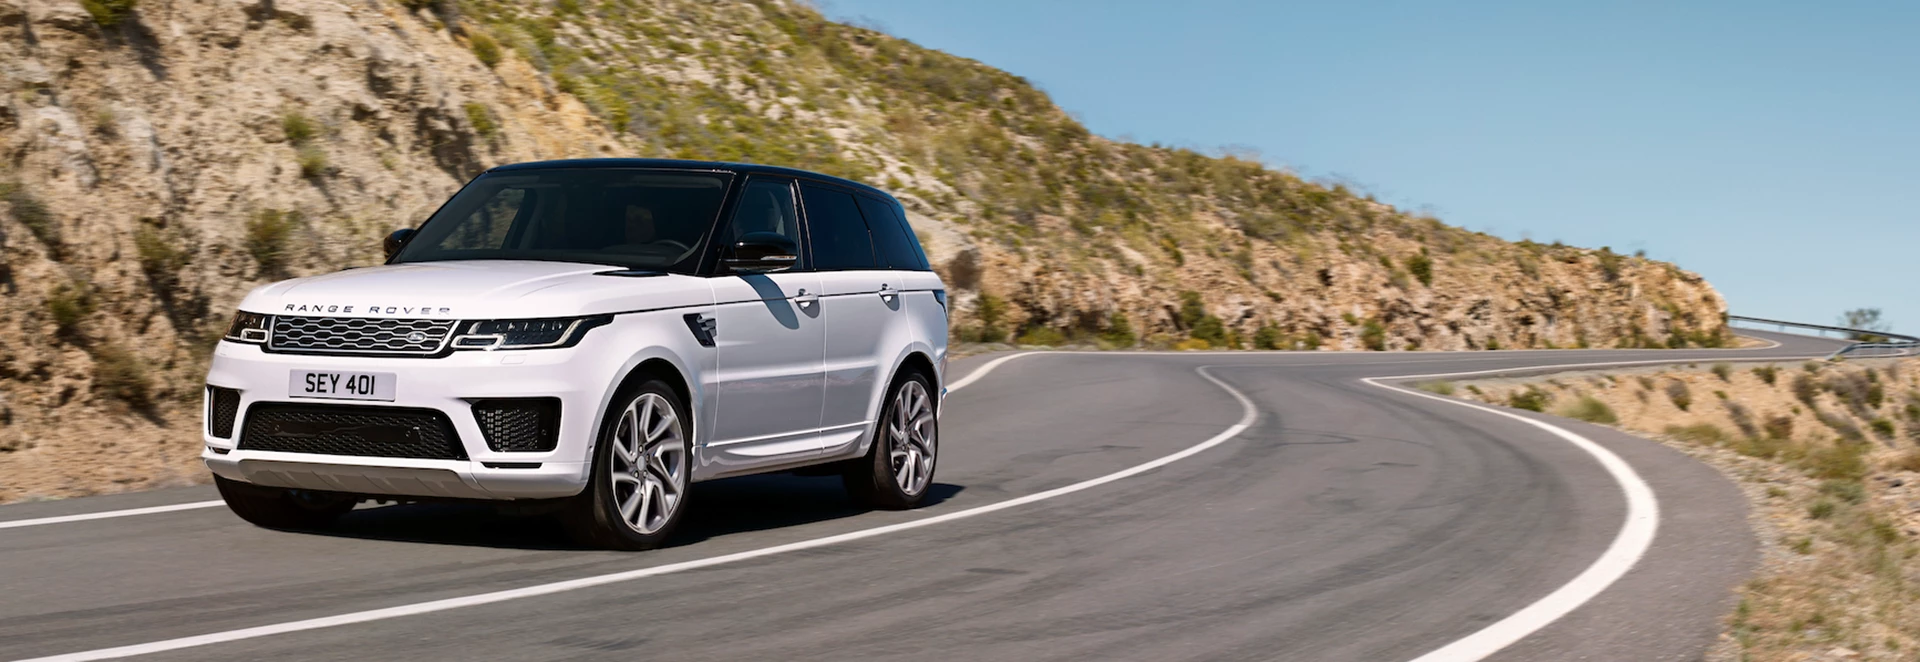 2018 Range Rover Sport plug-in hybrid revealed by Land Rover 